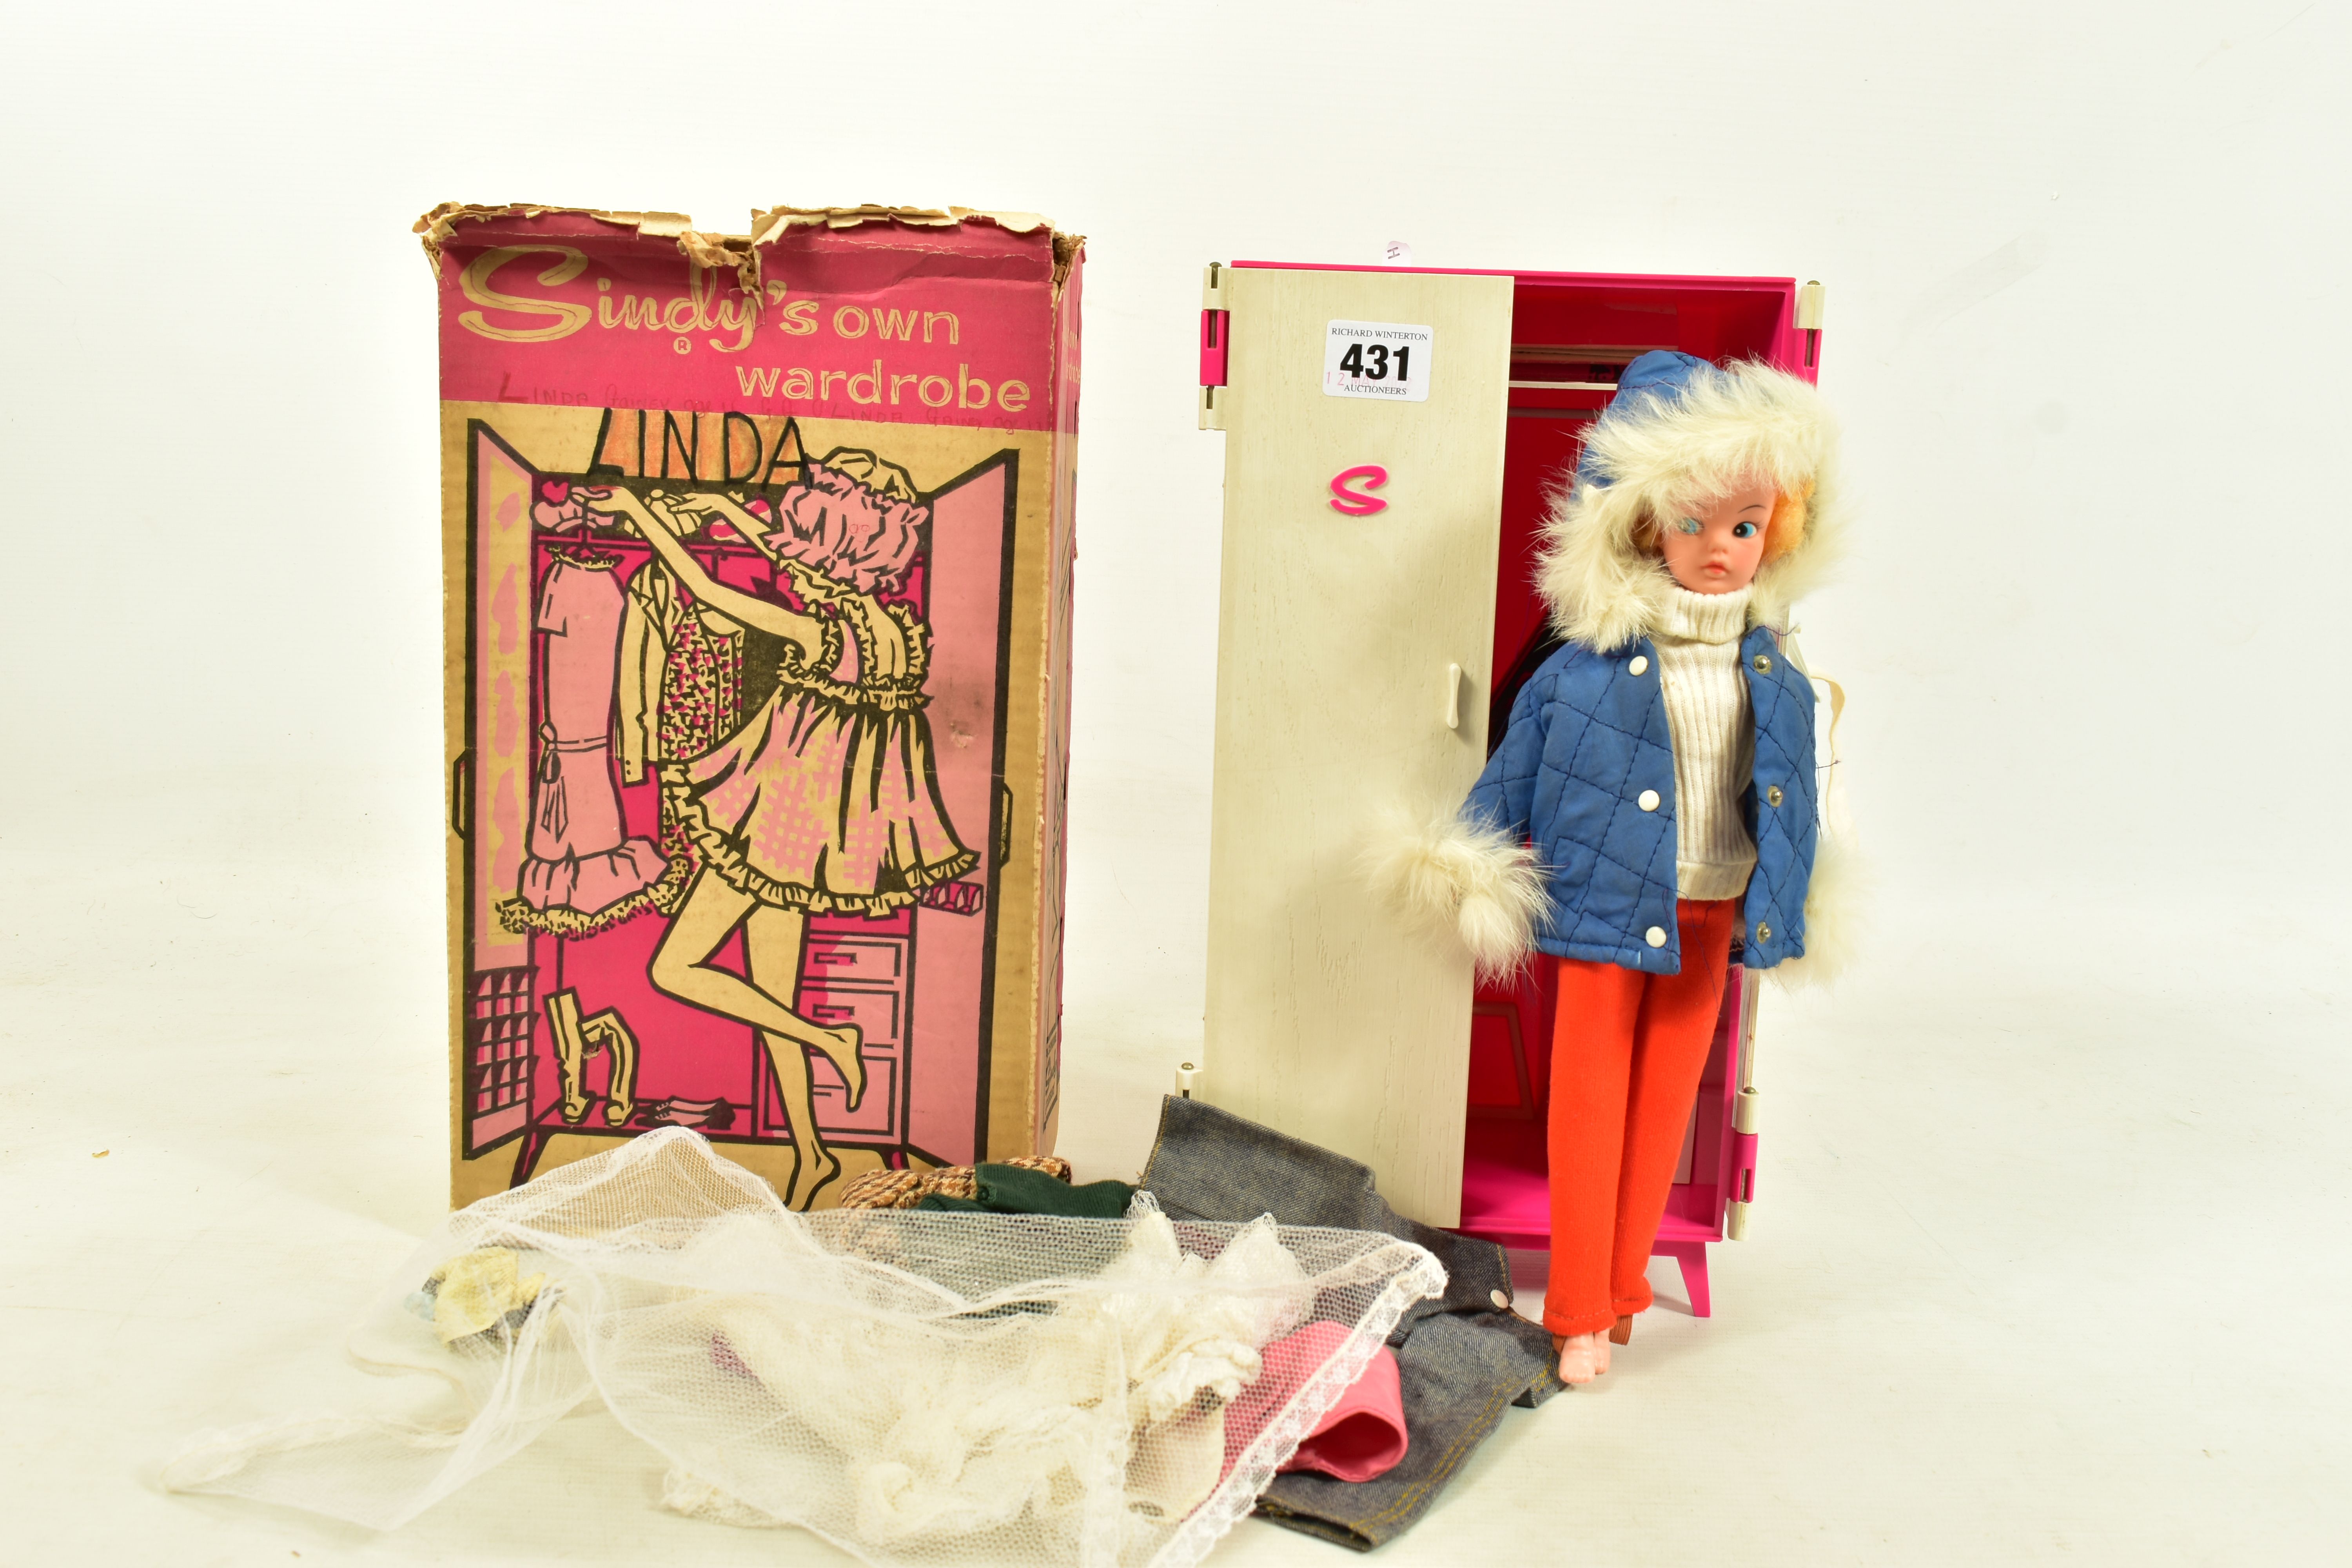 A BOXED SINDY'S OWN WARDROBE, appears complete and in fairly good condition, with Sindy Set and Hair